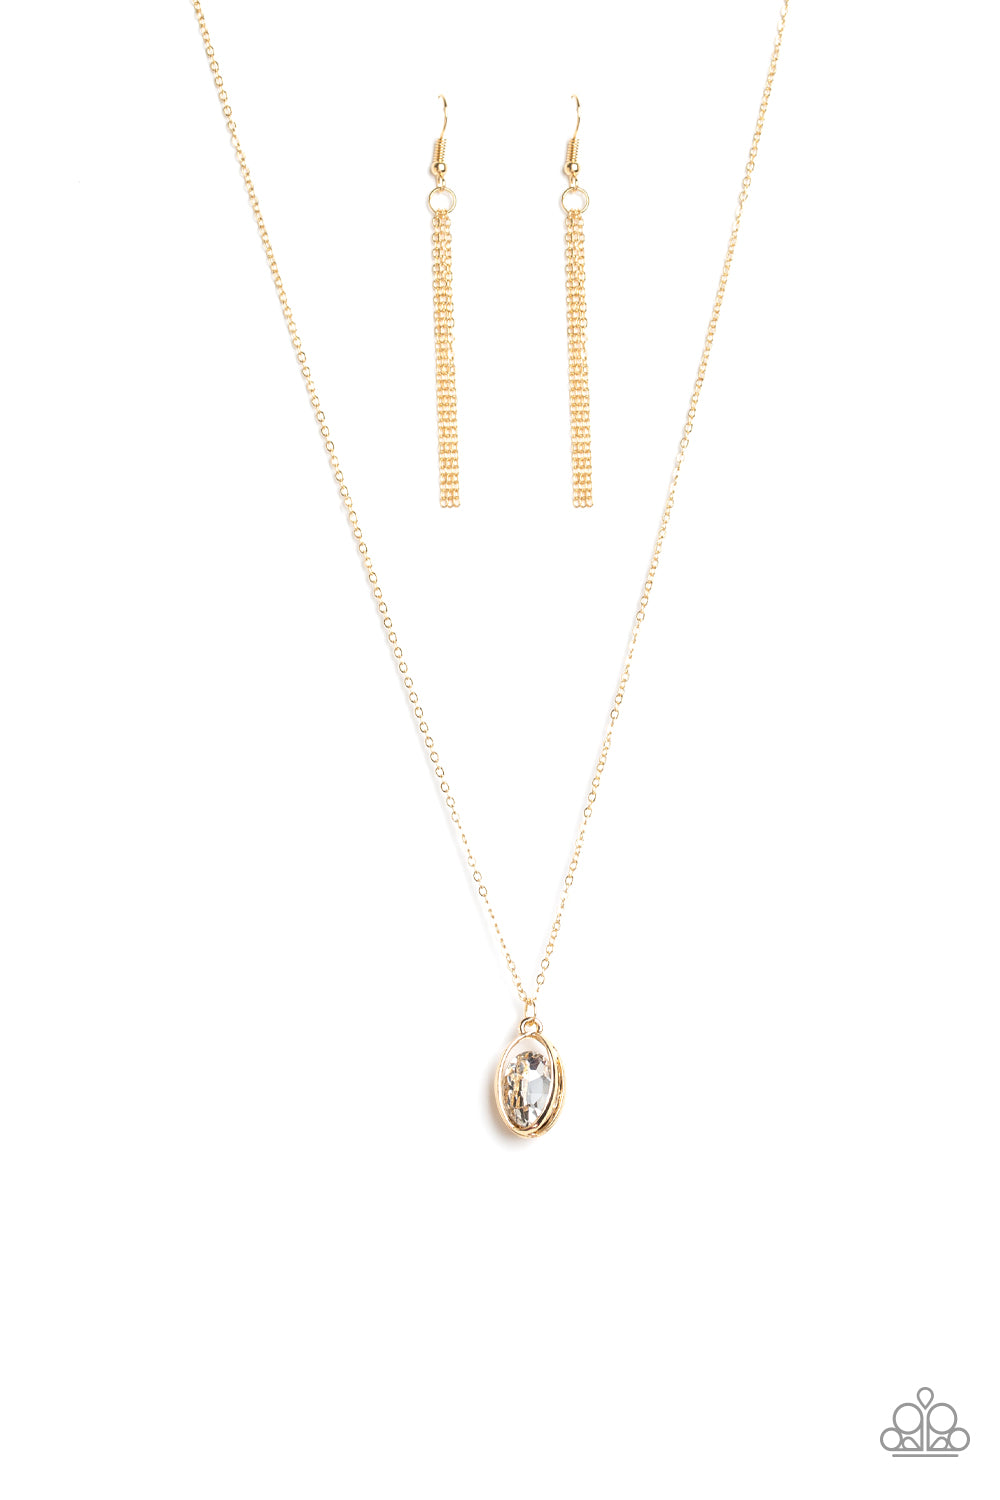 TIMELESS TRANQUILITY - GOLD NECKLACE